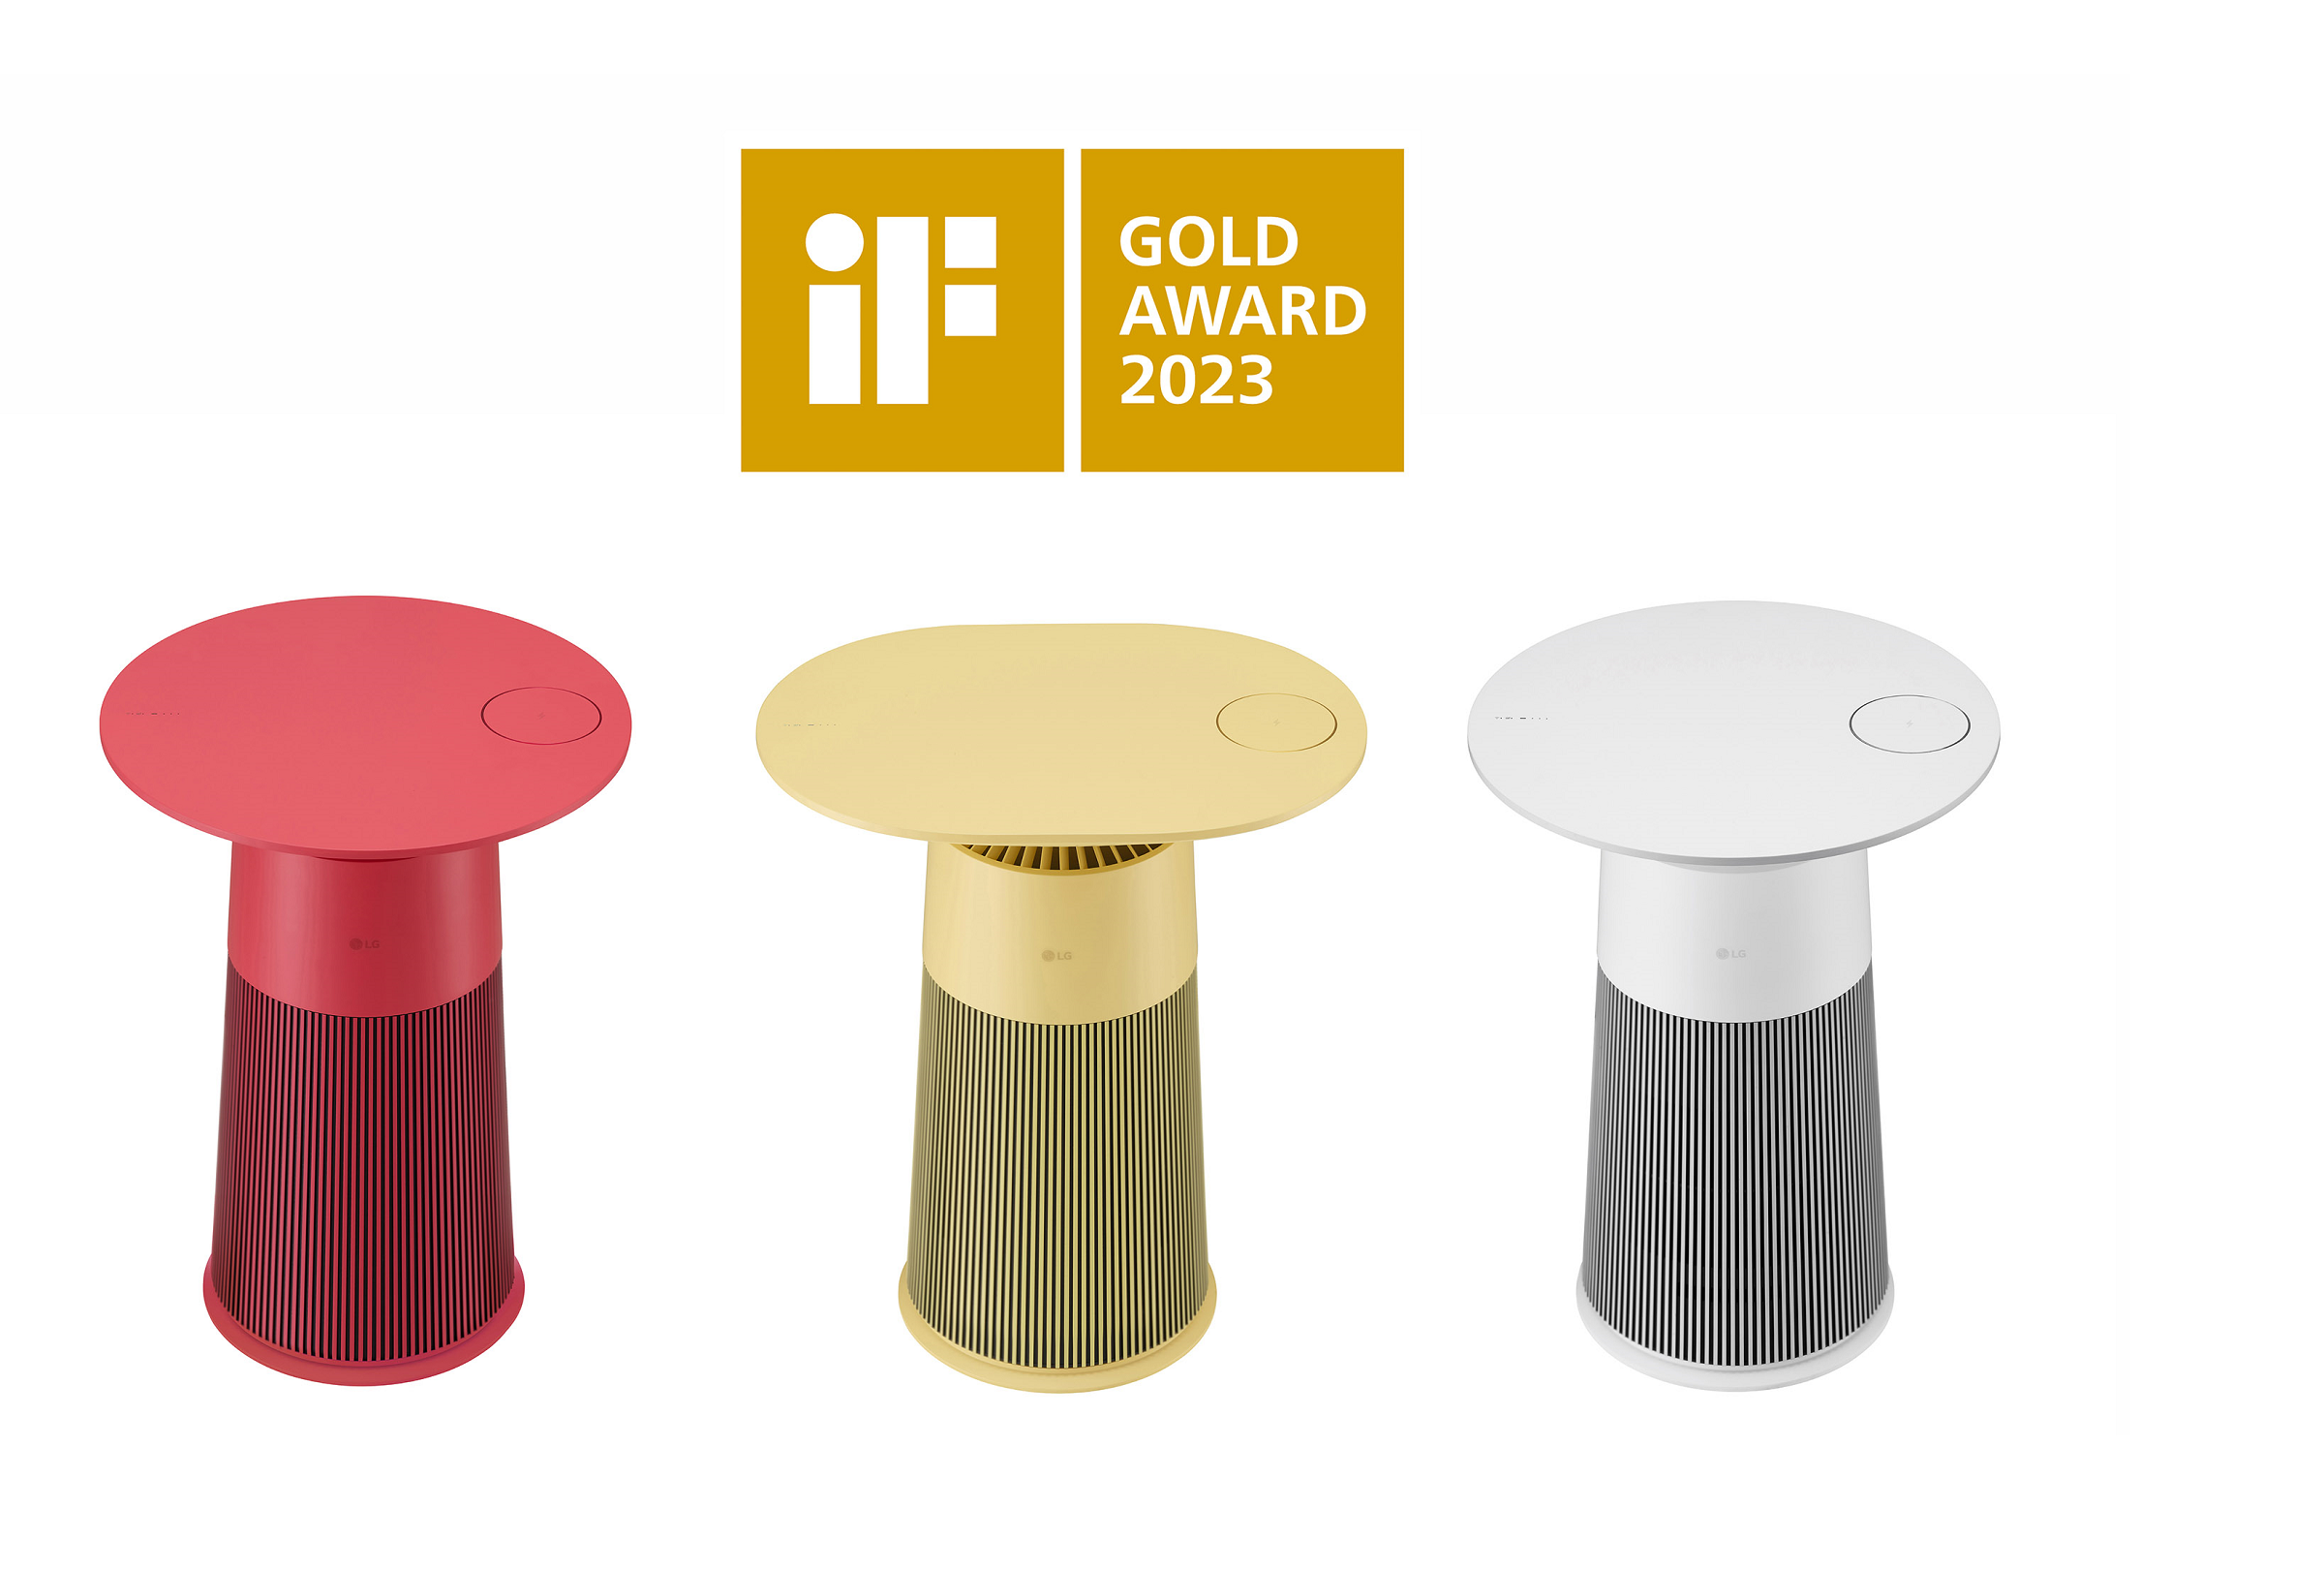 LG Aero Furniture in three different colors with iF Design Award's Gold Award 2023 logo on the top